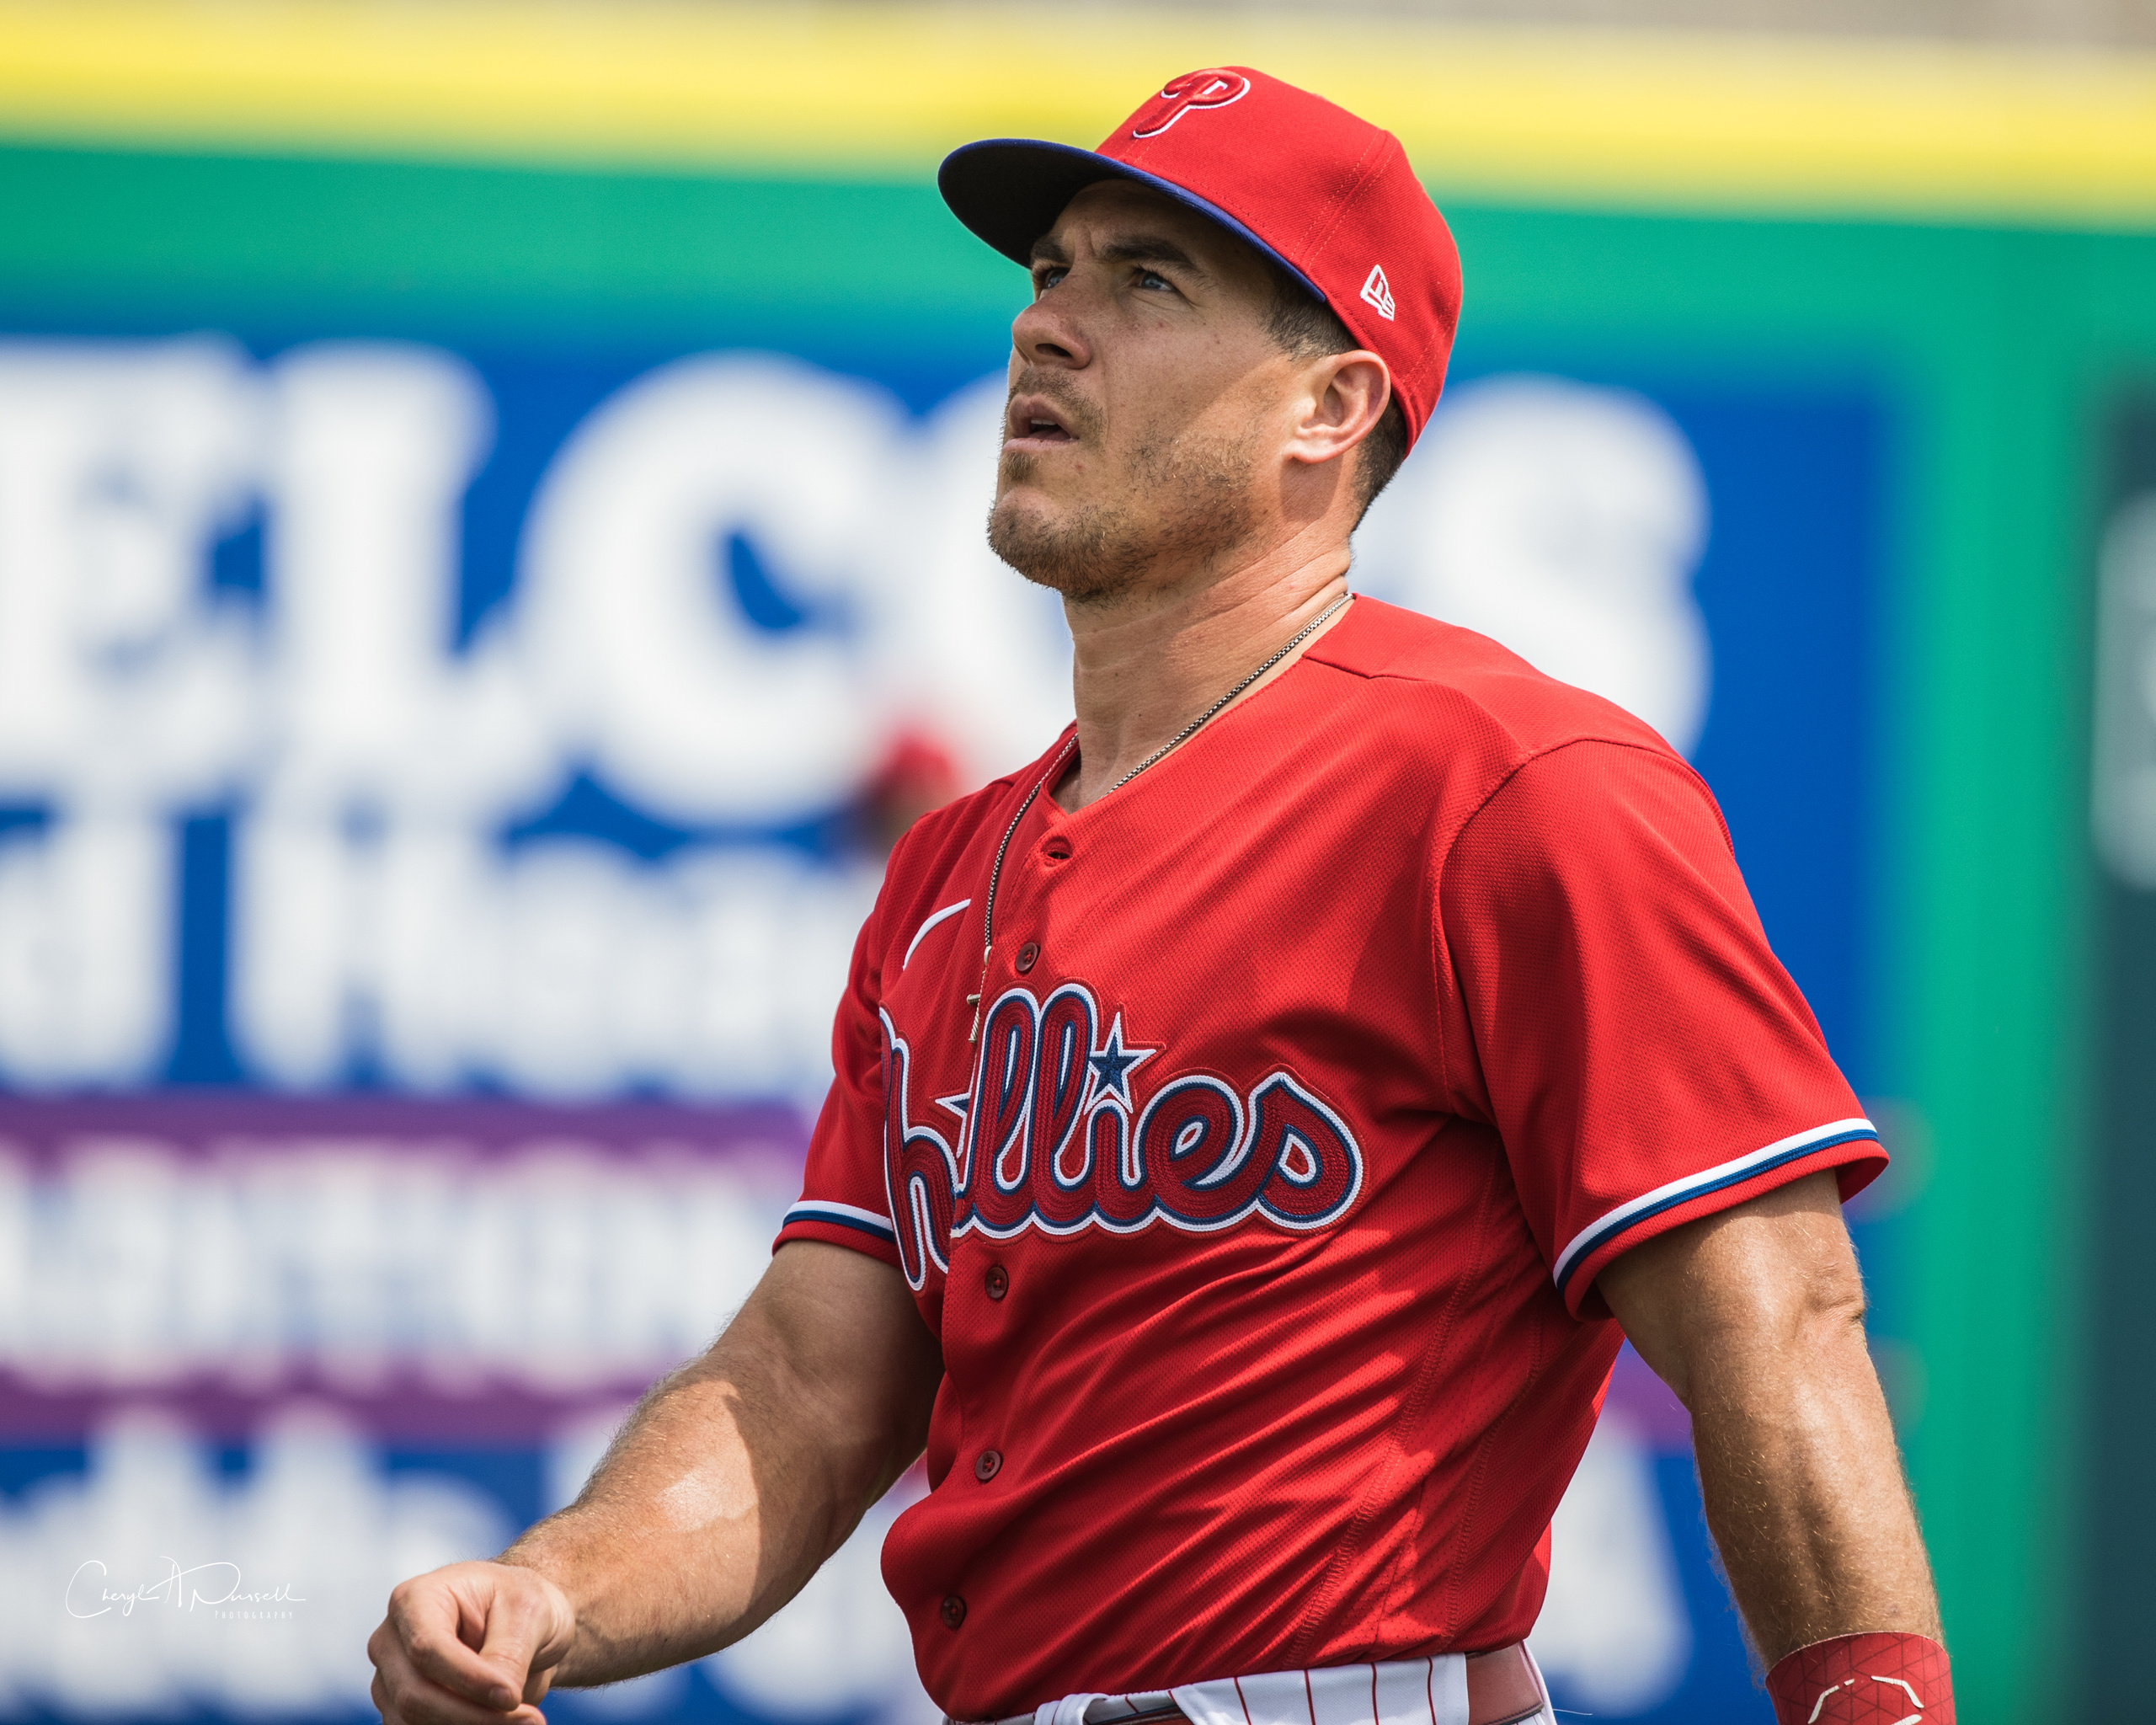 J.T. Realmuto, Alec Bohm among unvaccinated Phillies who will not